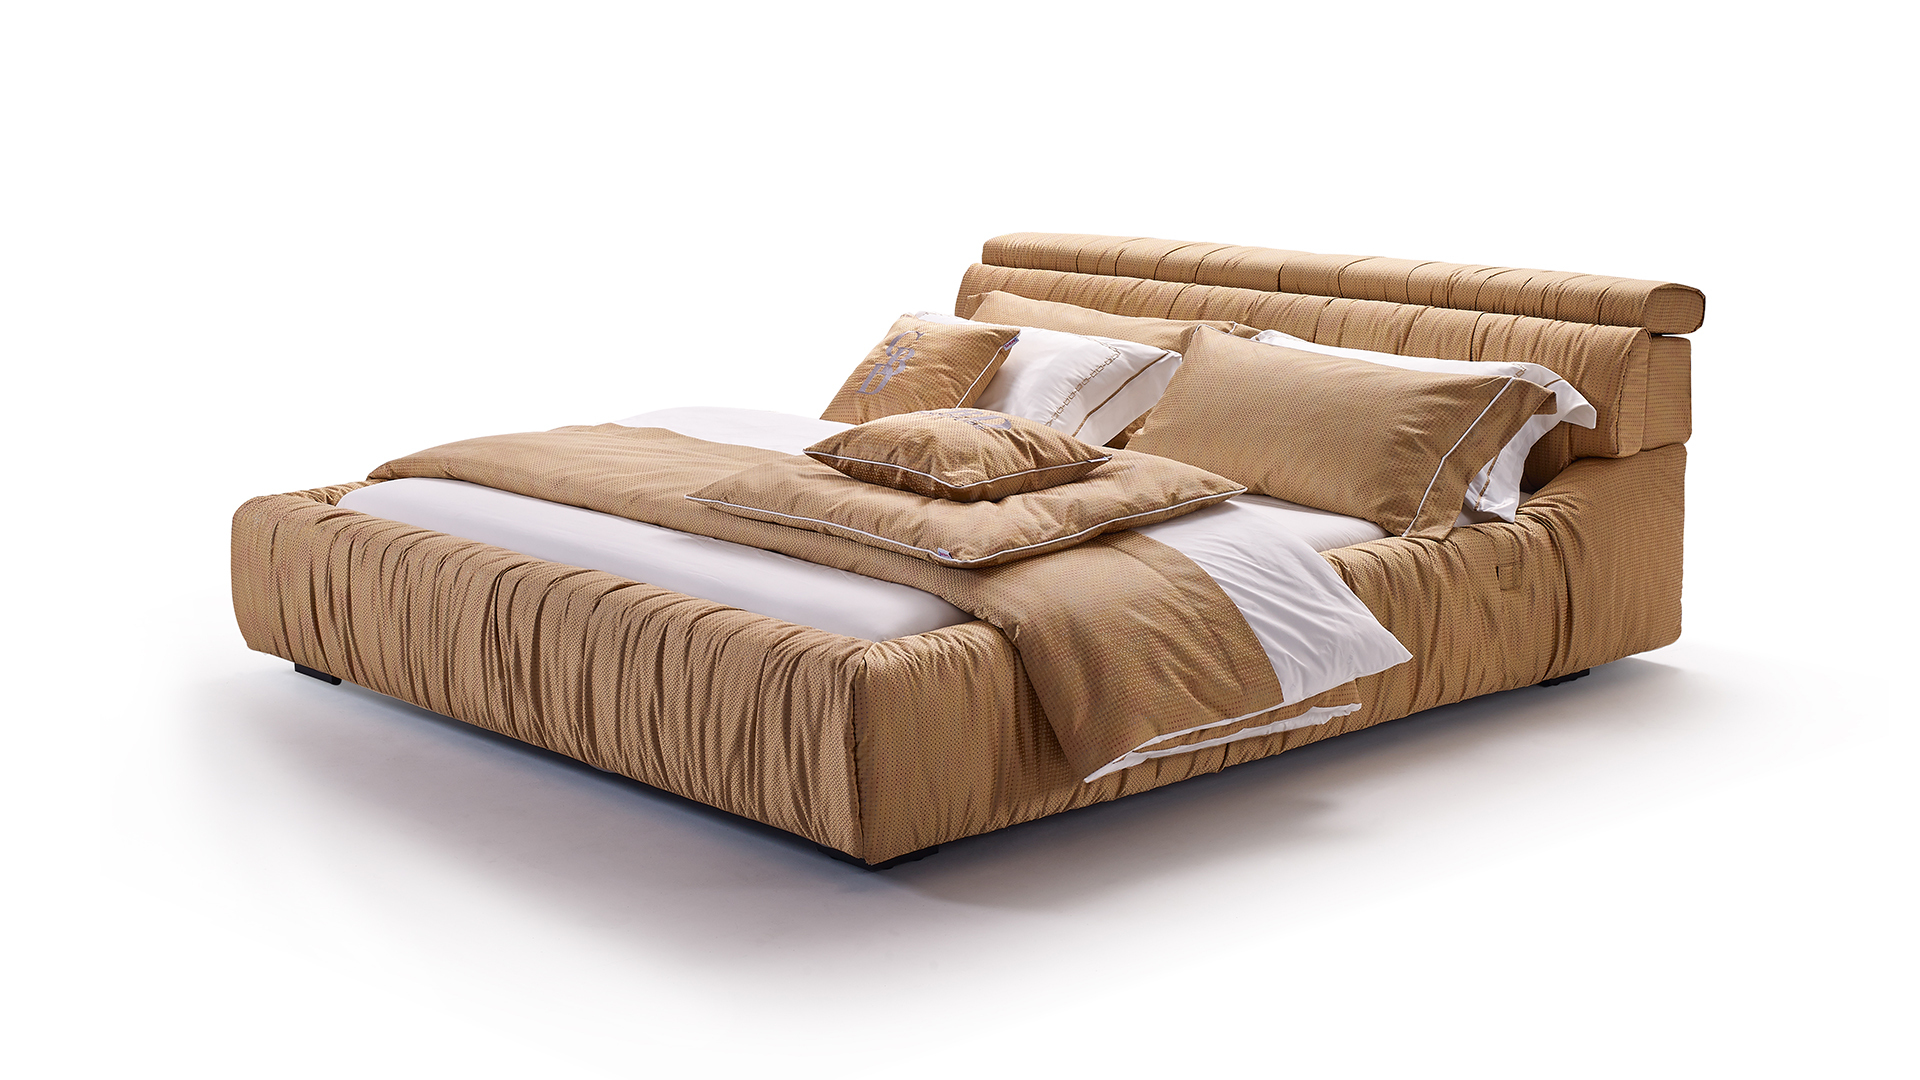 <p><strong>description：</strong></p><p>*bedframe with the 3D slats or motion</p><p>*washable fabric cover</p><p>*Well matched the mattress and bedding.</p><p><br/></p>